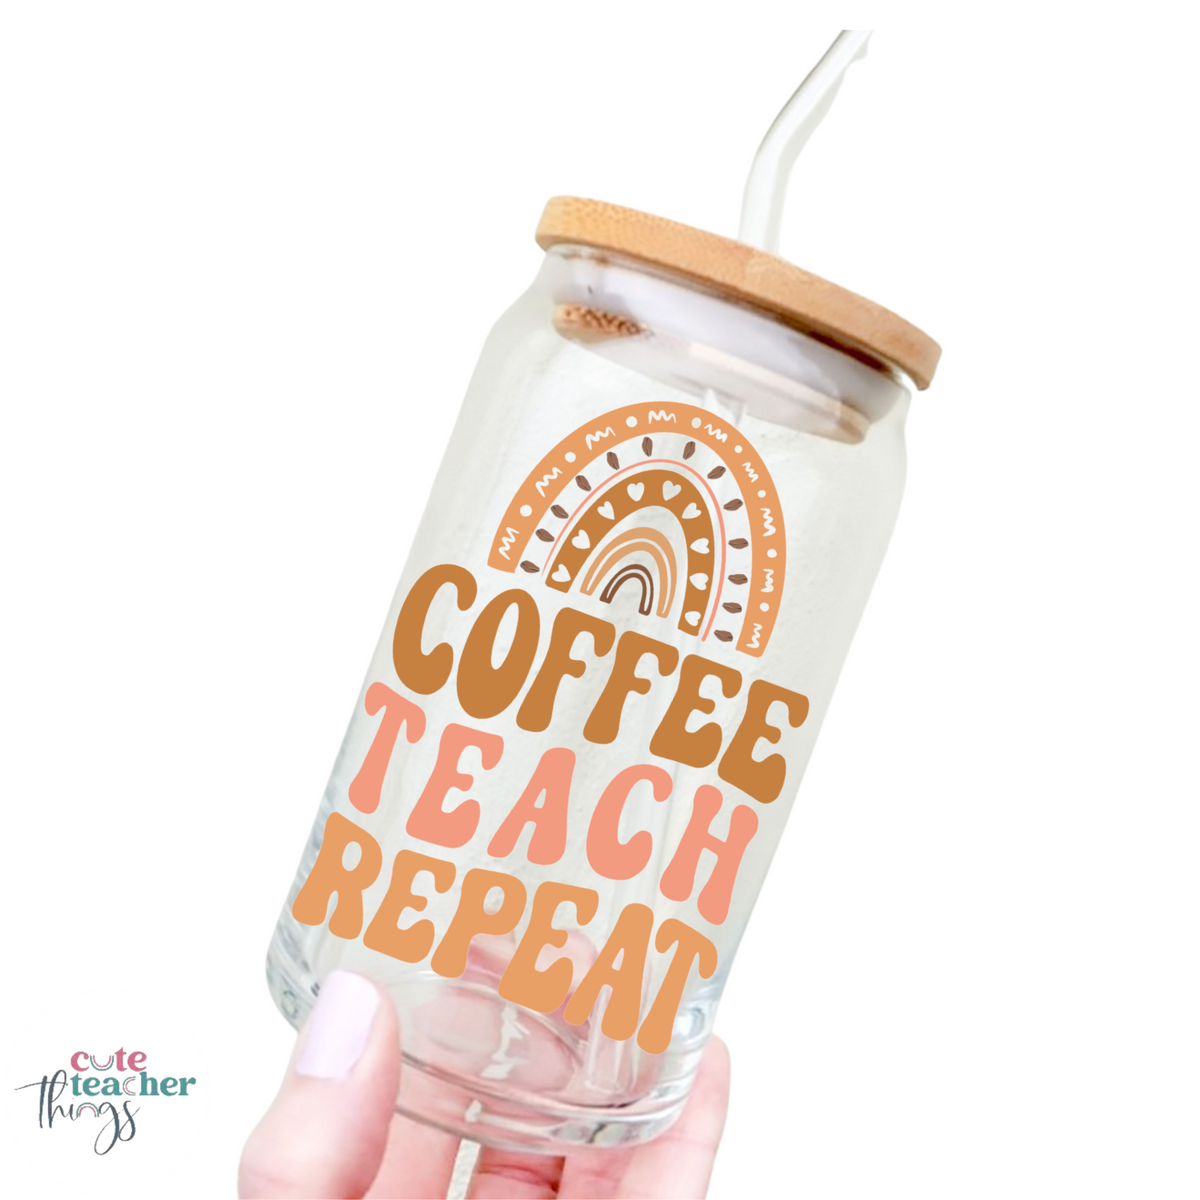 Coffee Teach Repeat Frosted Glass Tumbler